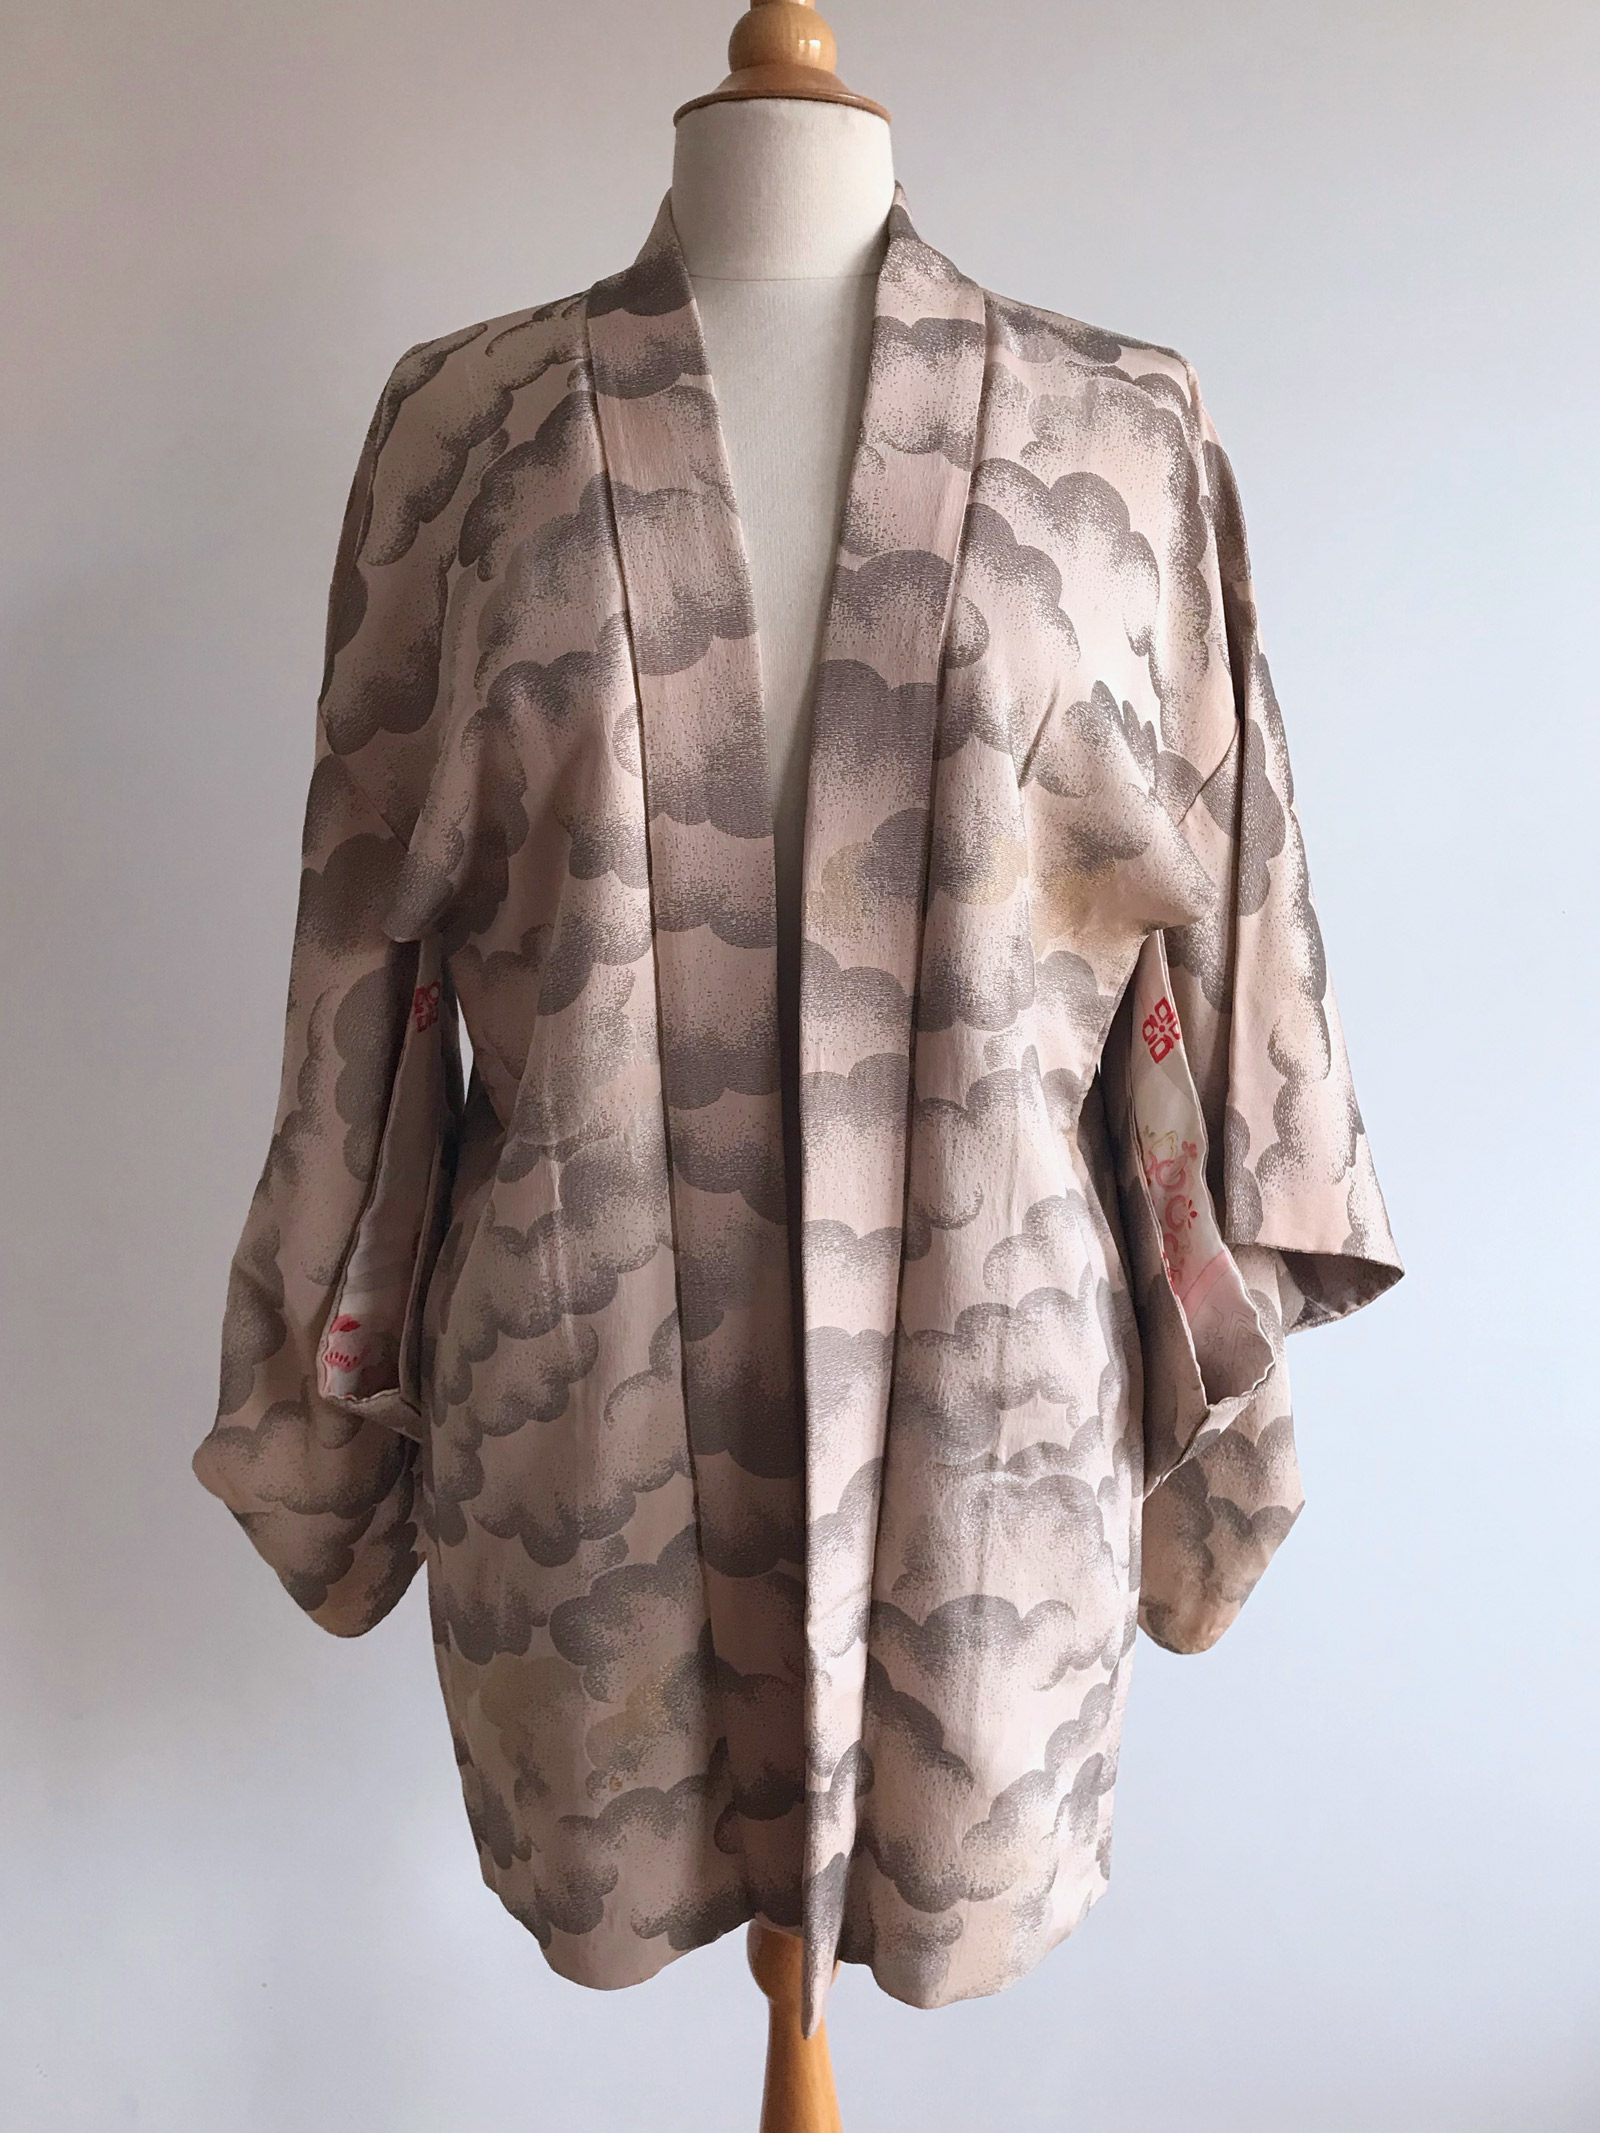 Kumo – all in the clouds with this beautiful Kimono Jacket